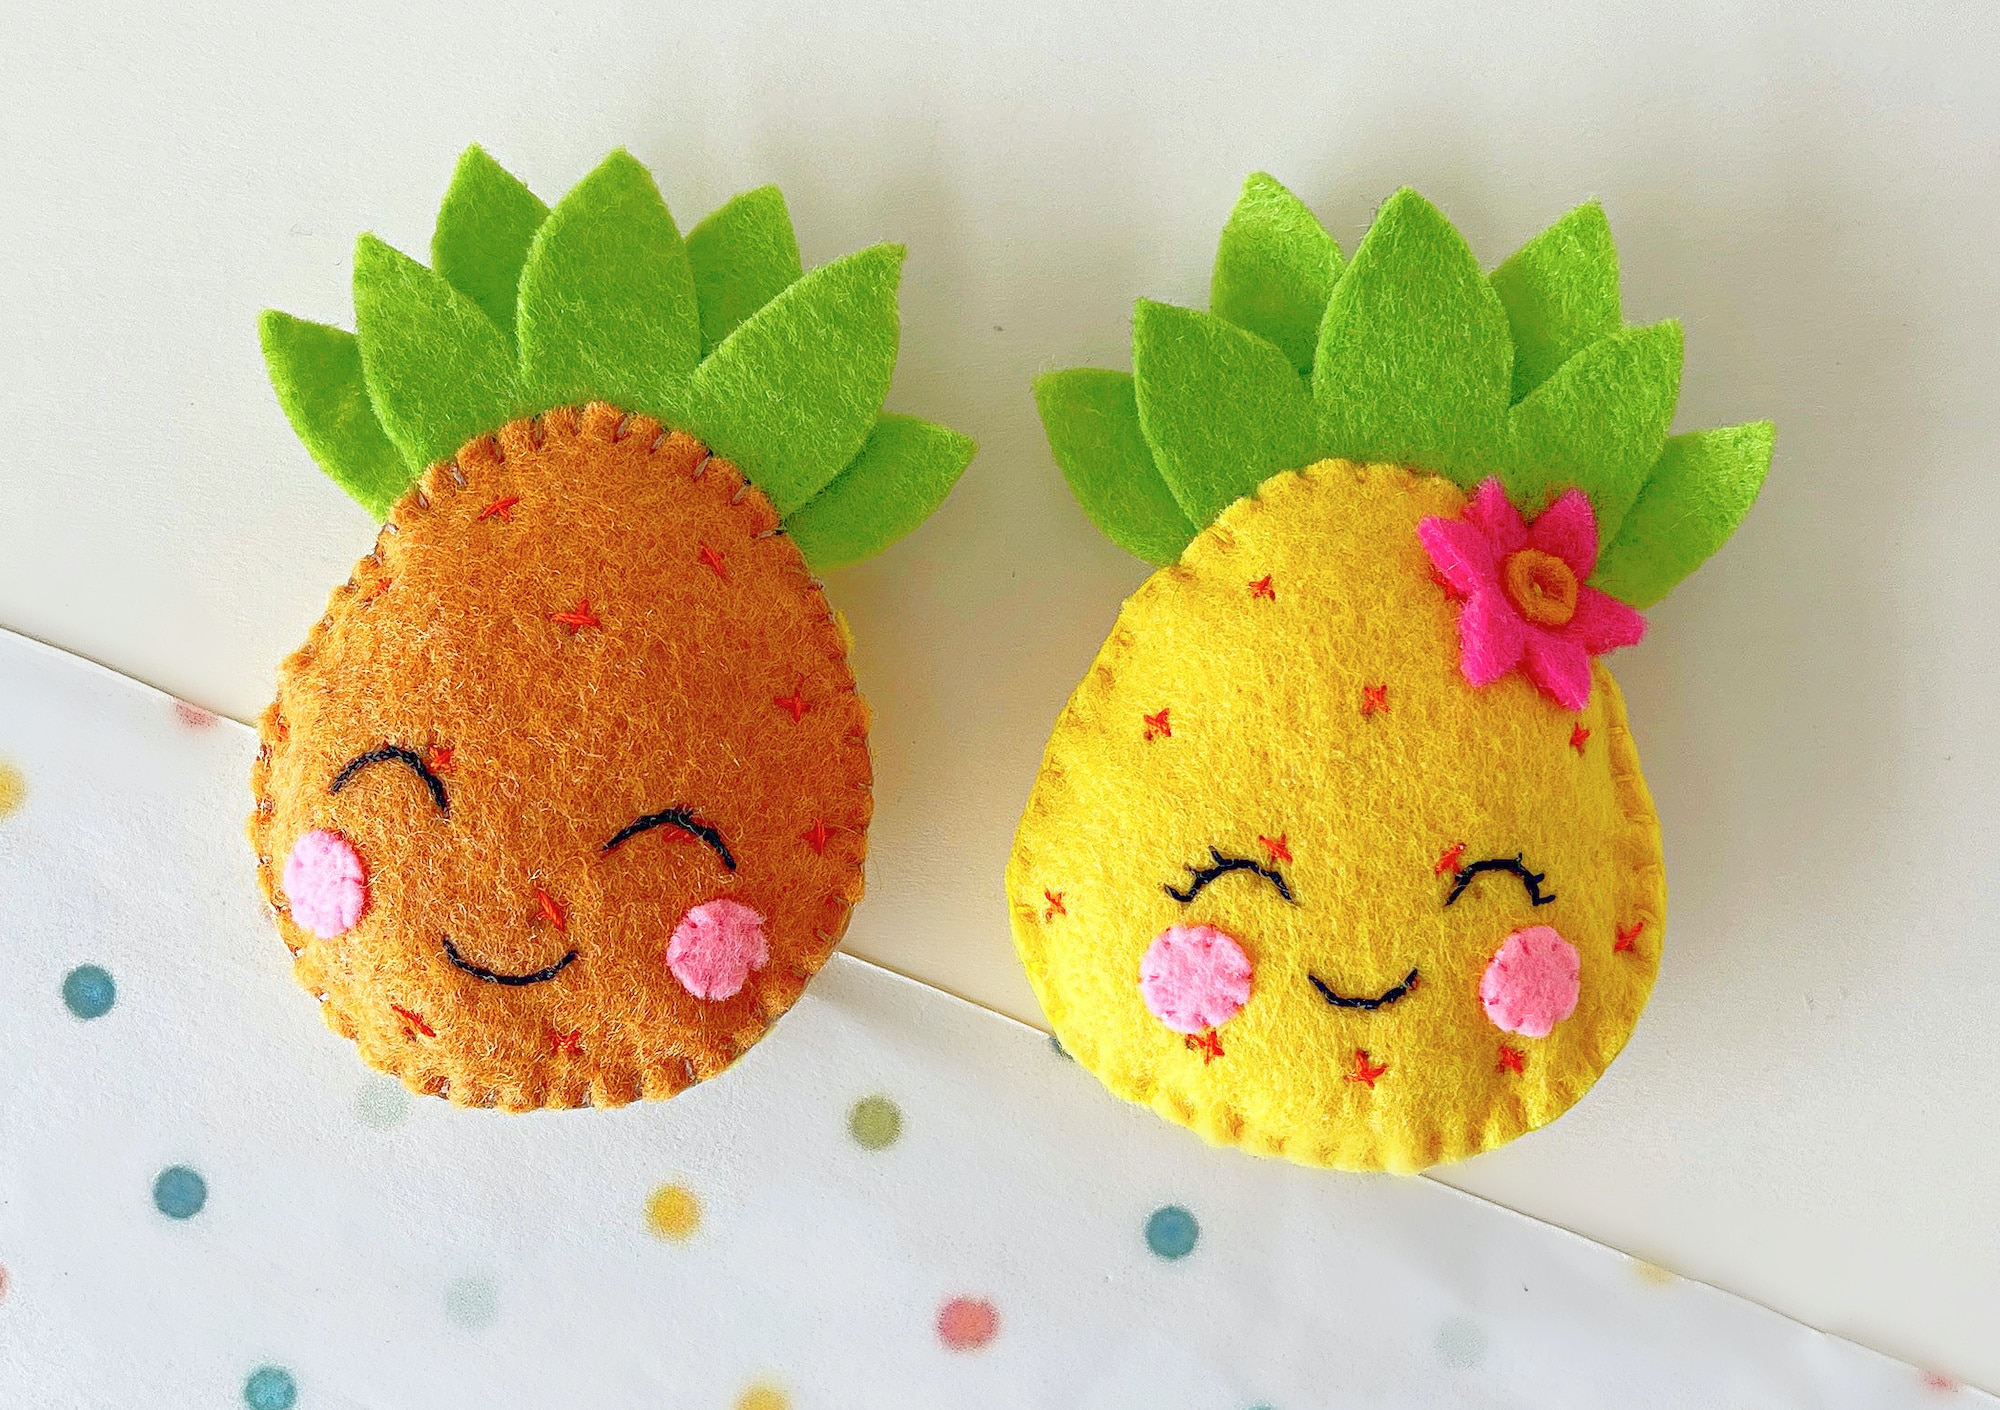 Two pineapple-shaped decorations made of felt on a background adorned with polka dots.